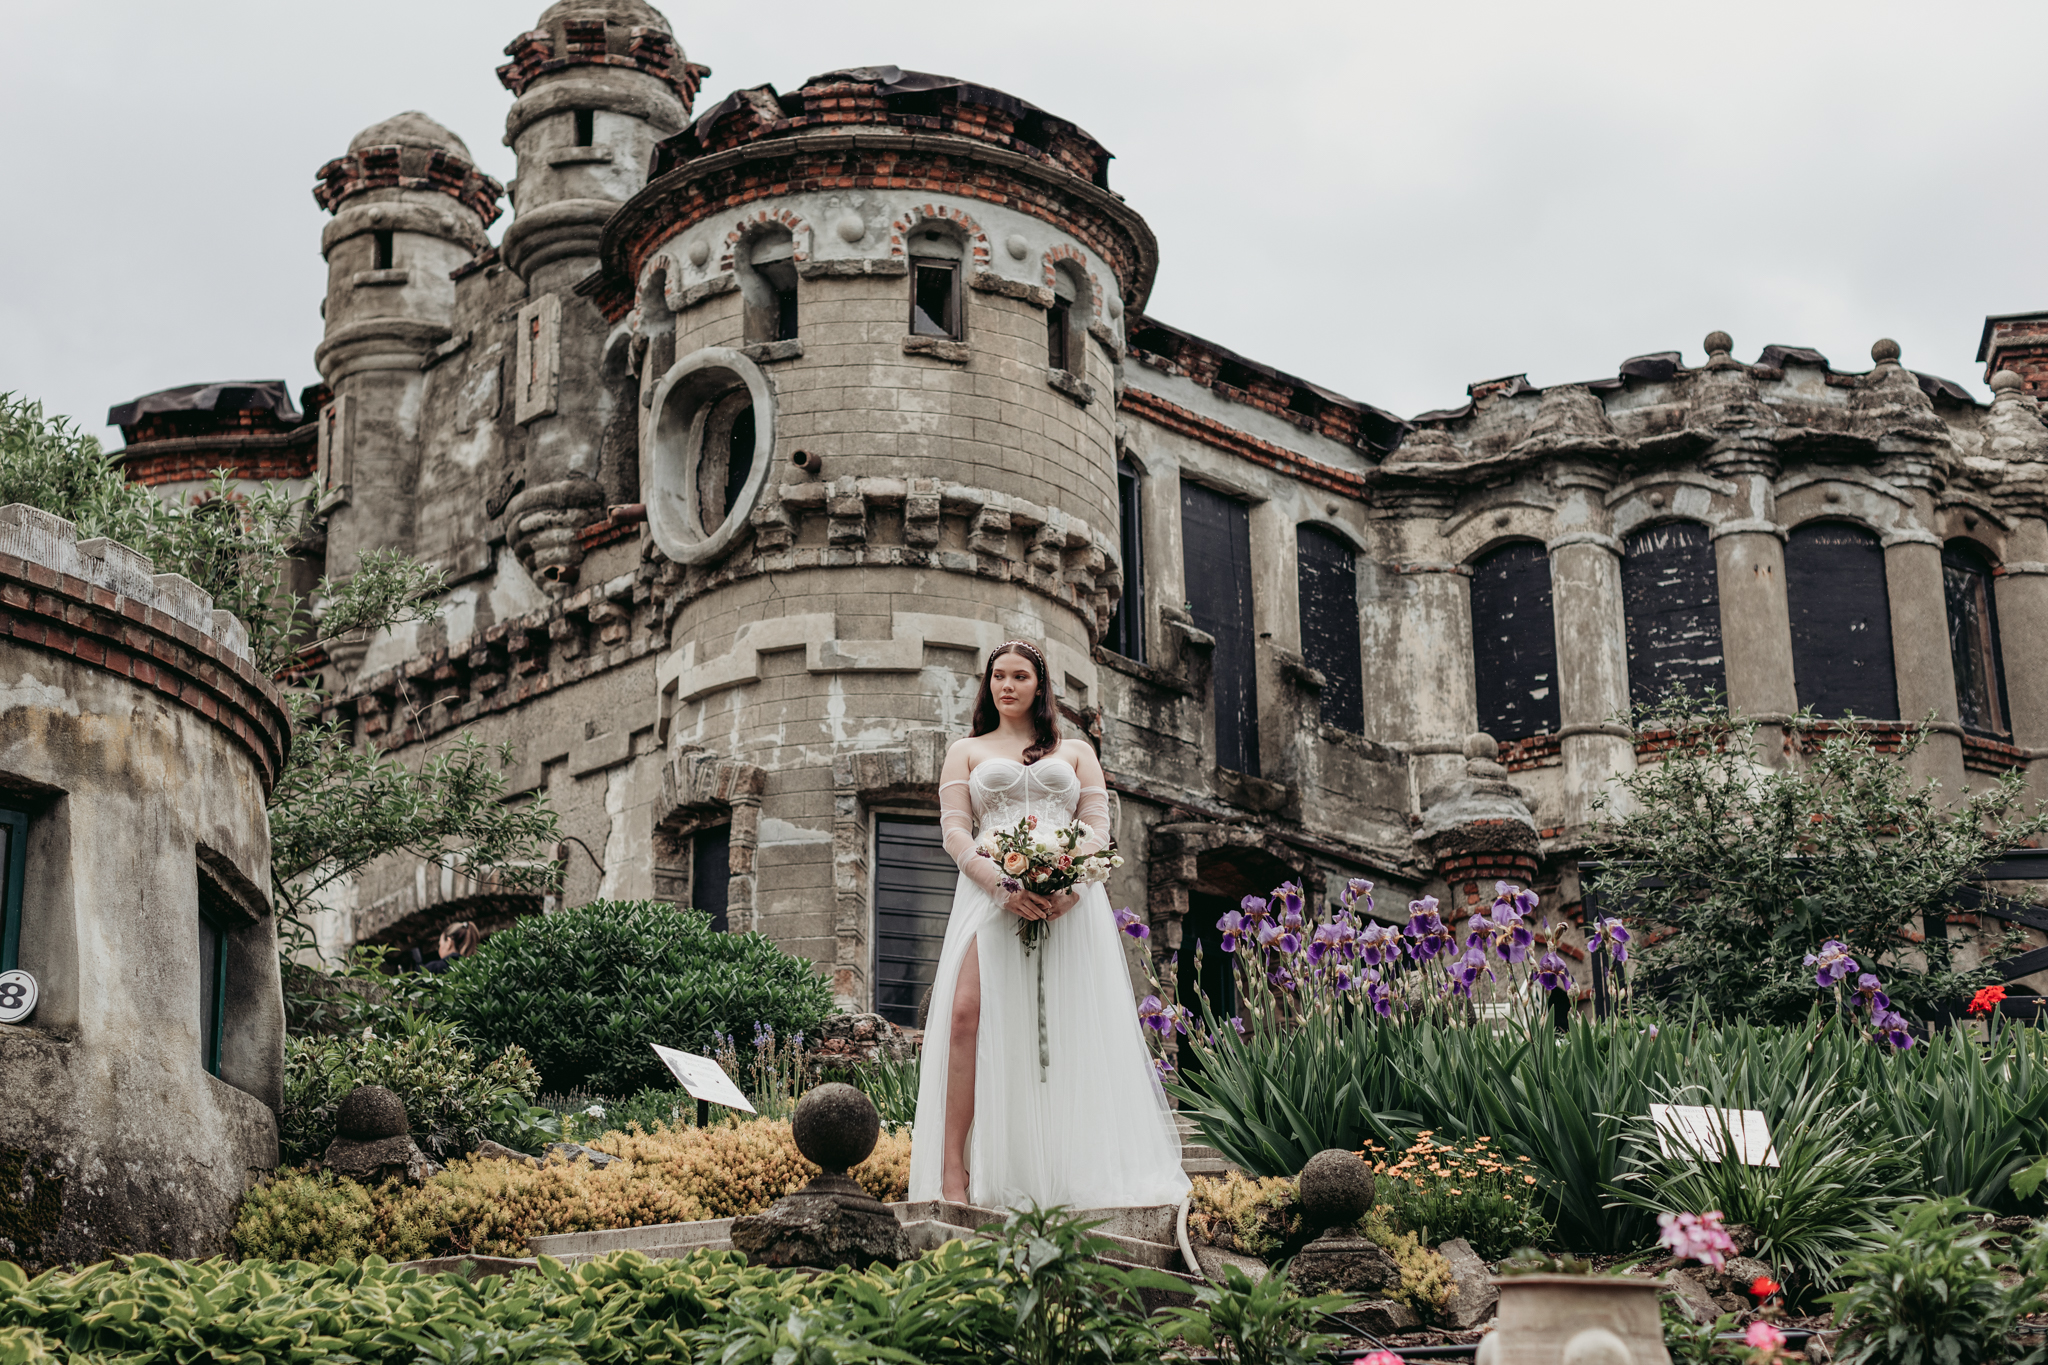 Styled Shoot at Bannerman Castle beautiful details by Hudson Valley wedding vendors wedding dress by wildblooms bridal, photo by Crys Torres Photography Beacon New York